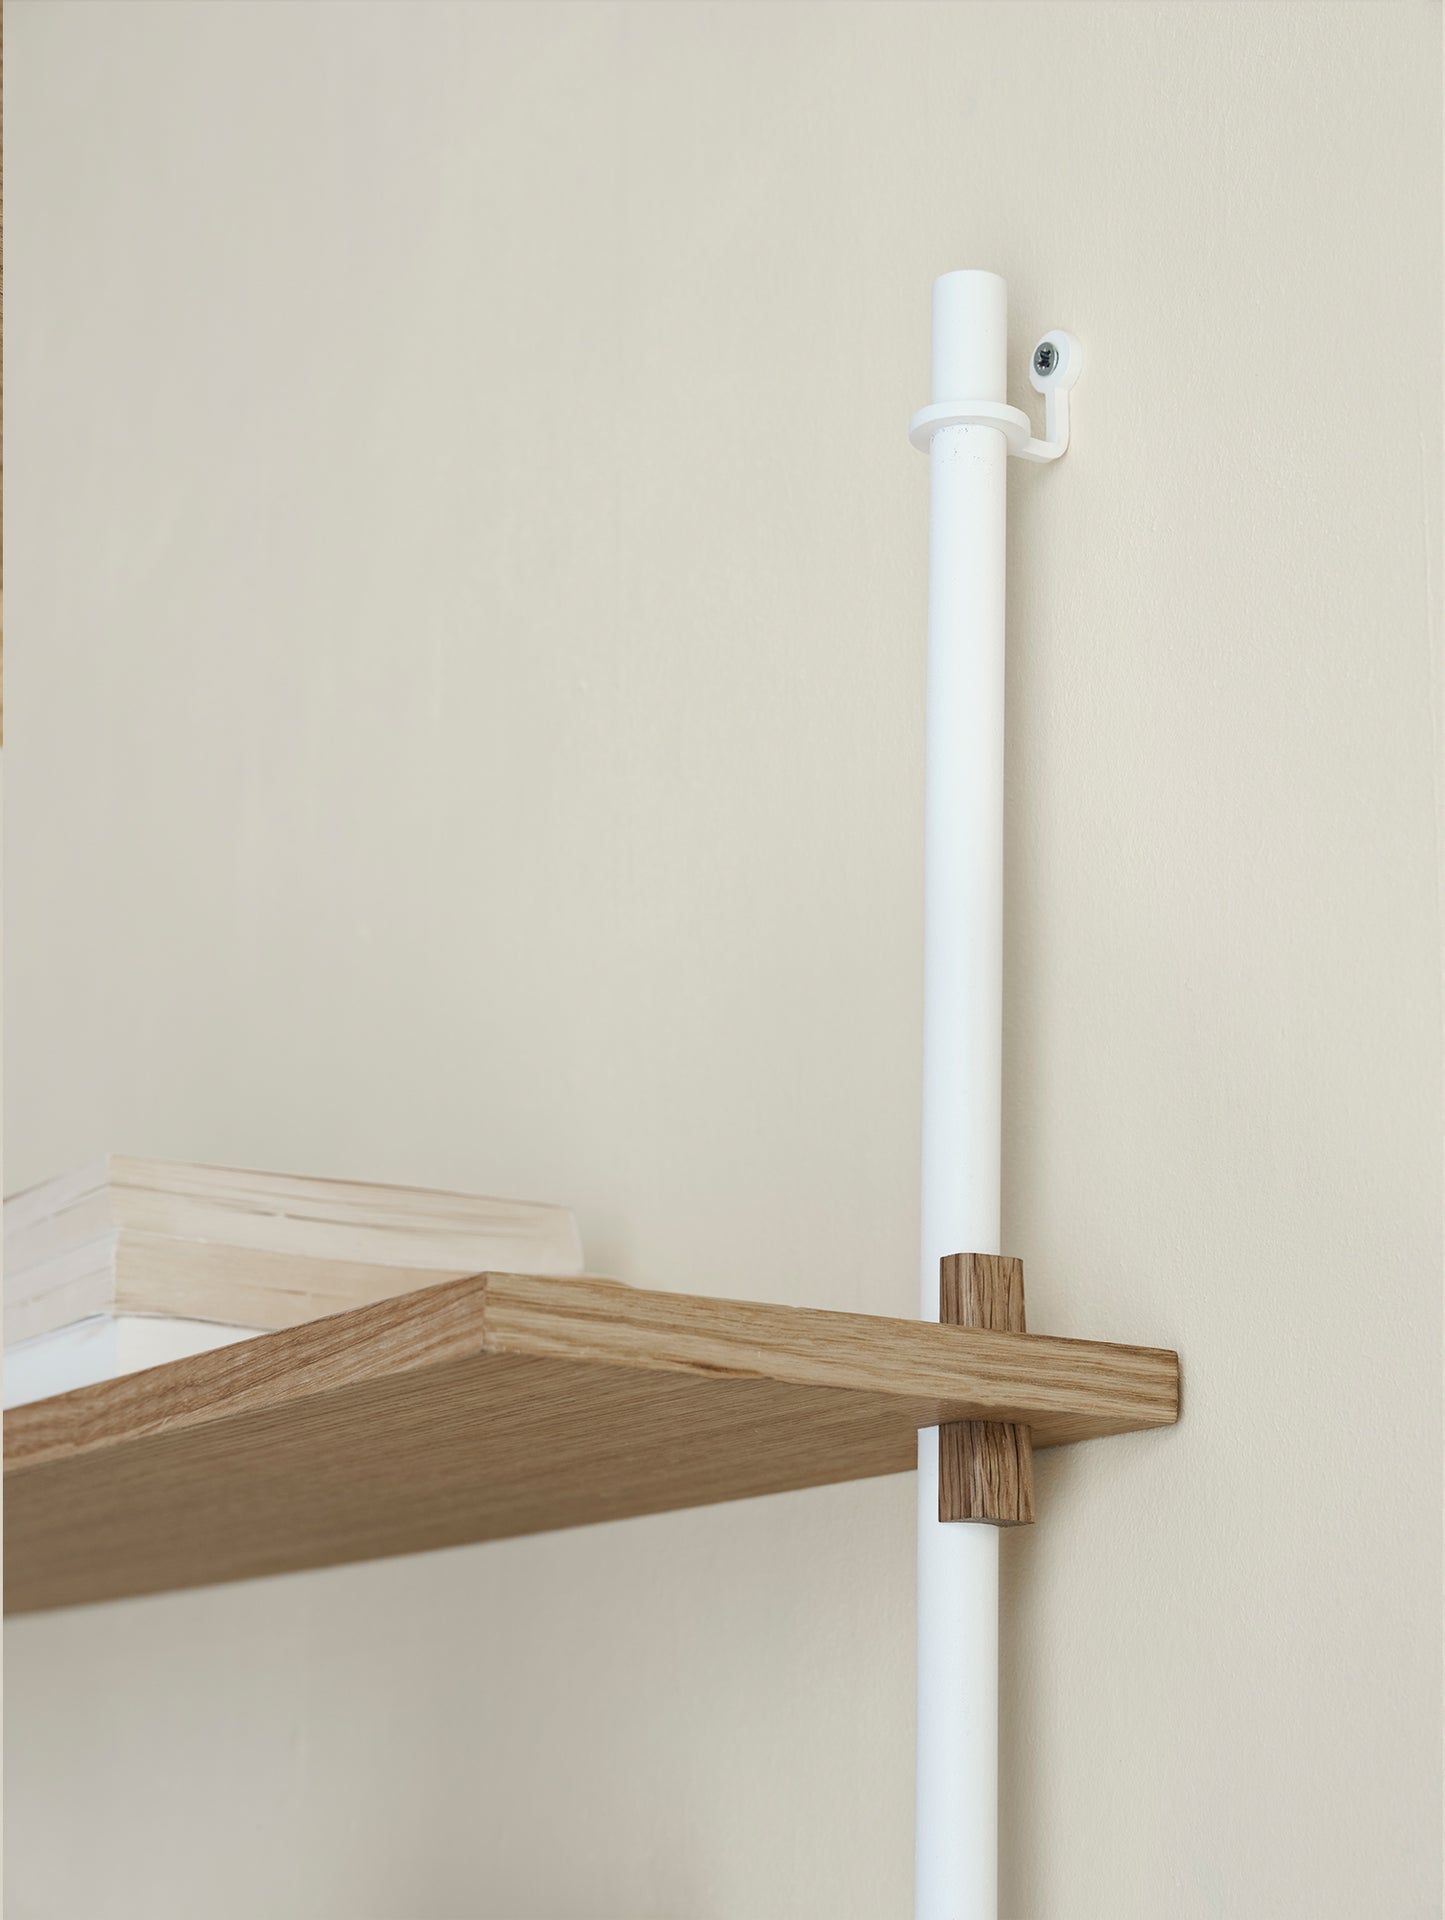 Wall Shelving System Sets (65 cm) by Moebe